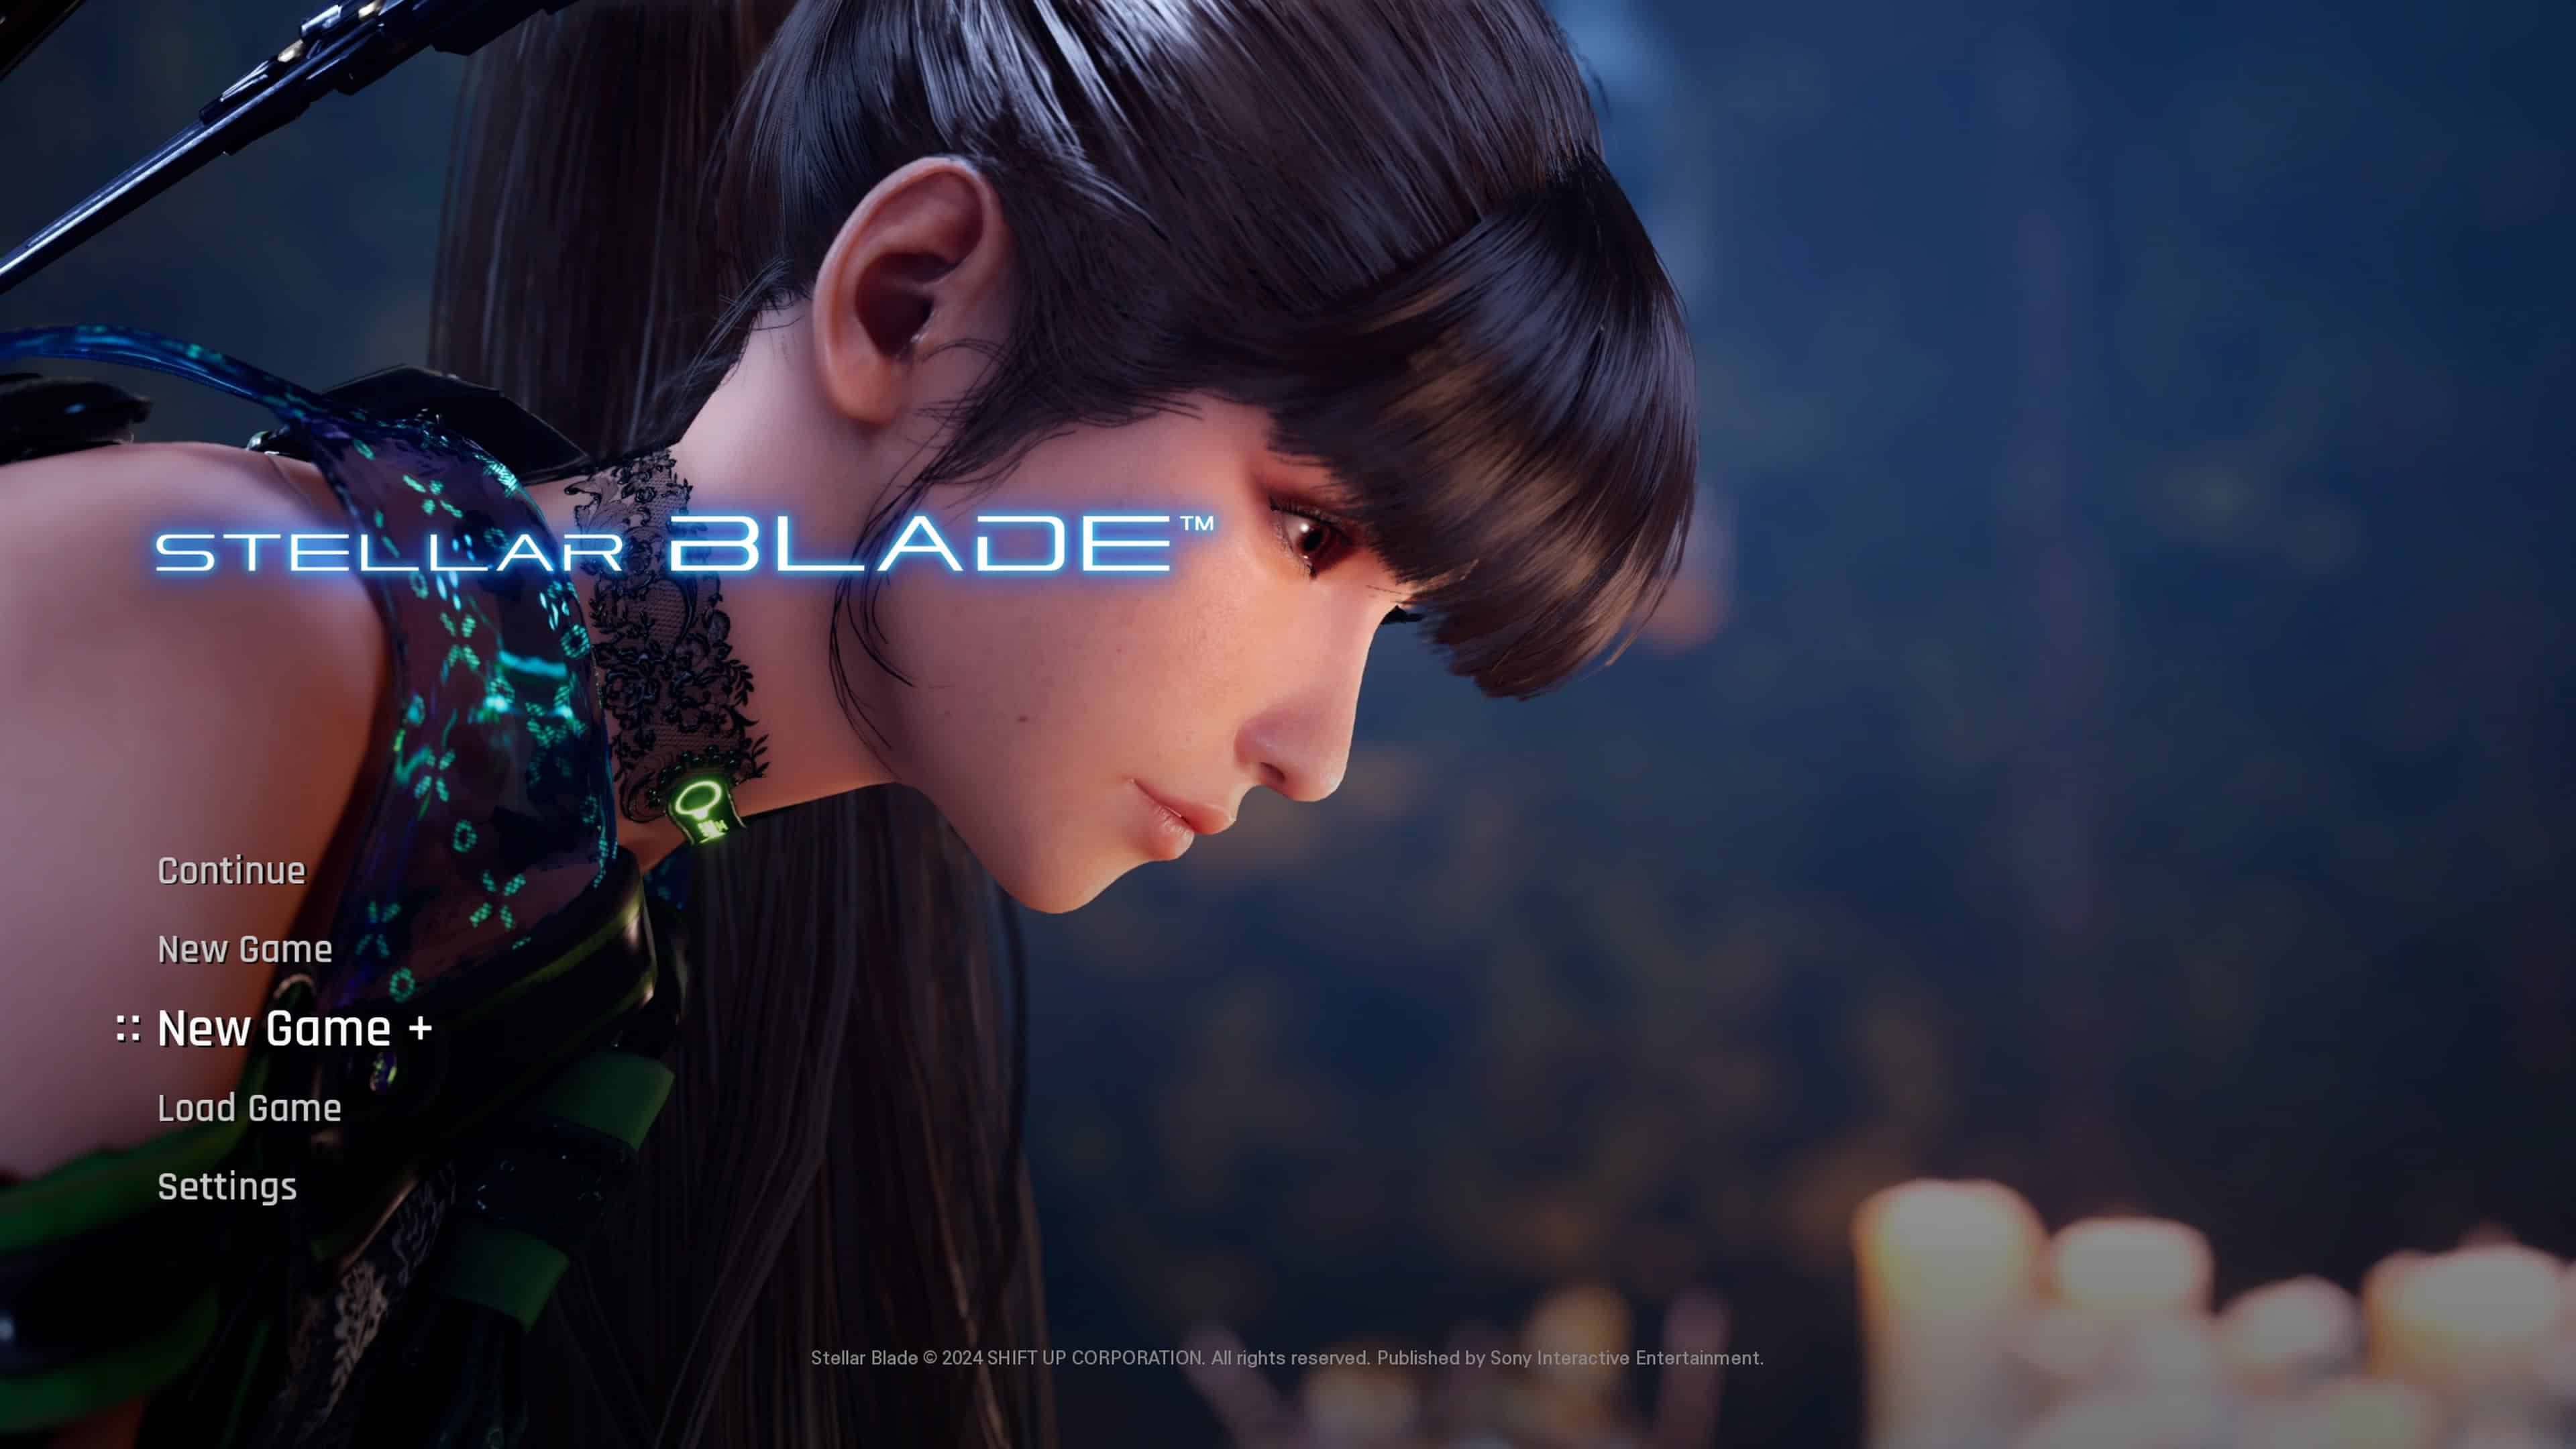 stellar blade new game plus - the main menu of the game showing the option to begin